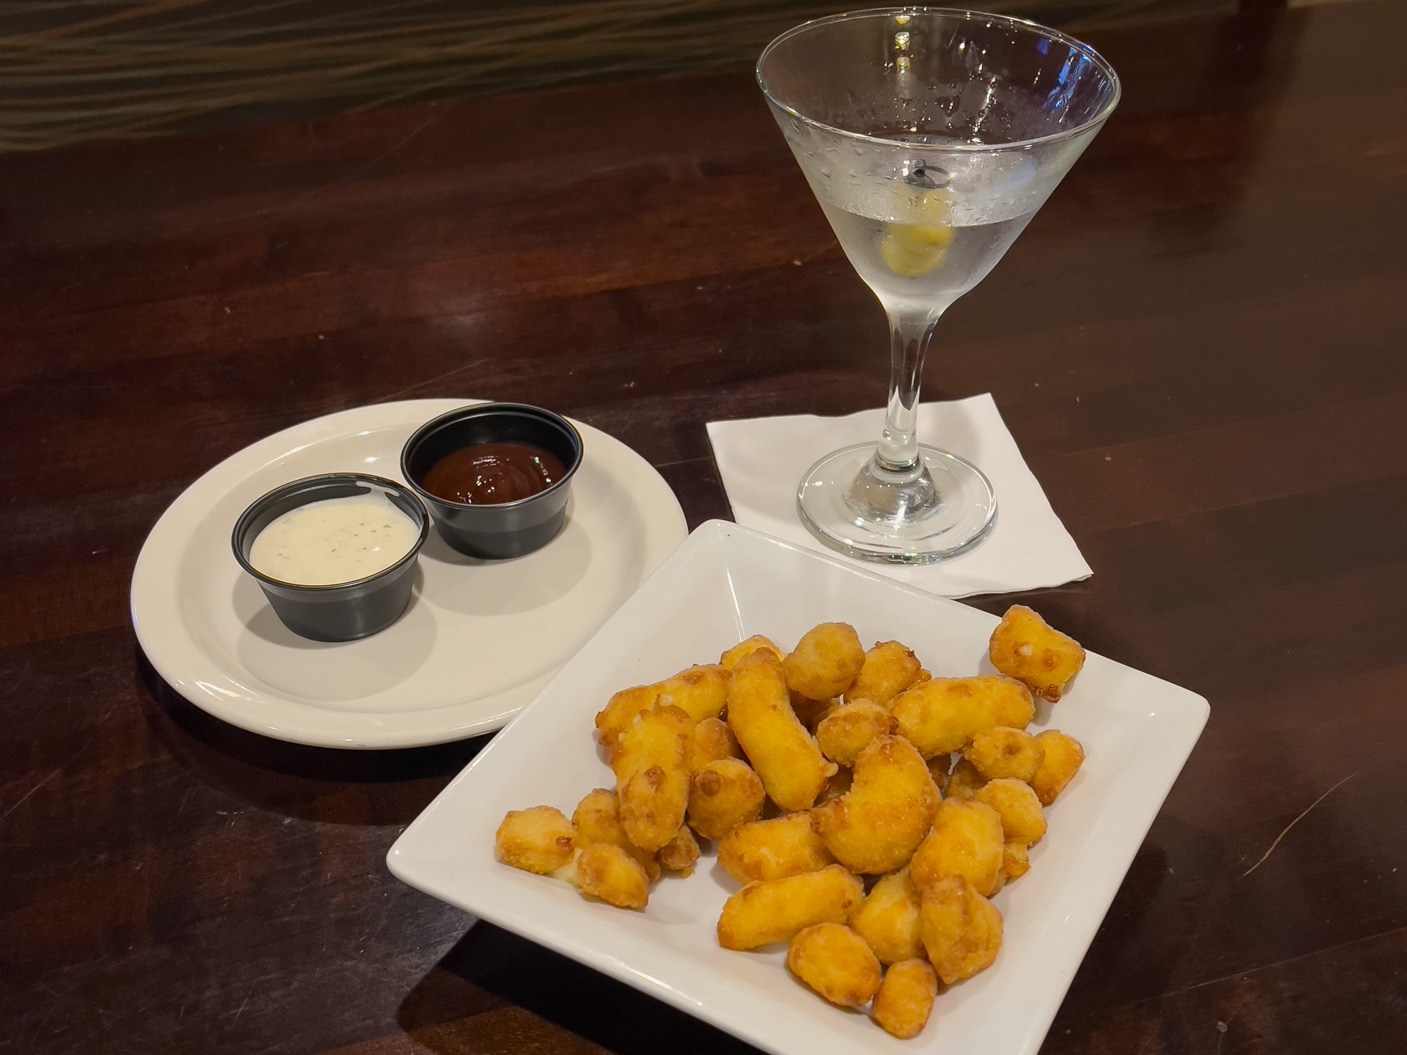 Wisconsin cheese curds deep-fried in Tomah, Wisconsin at Best Western